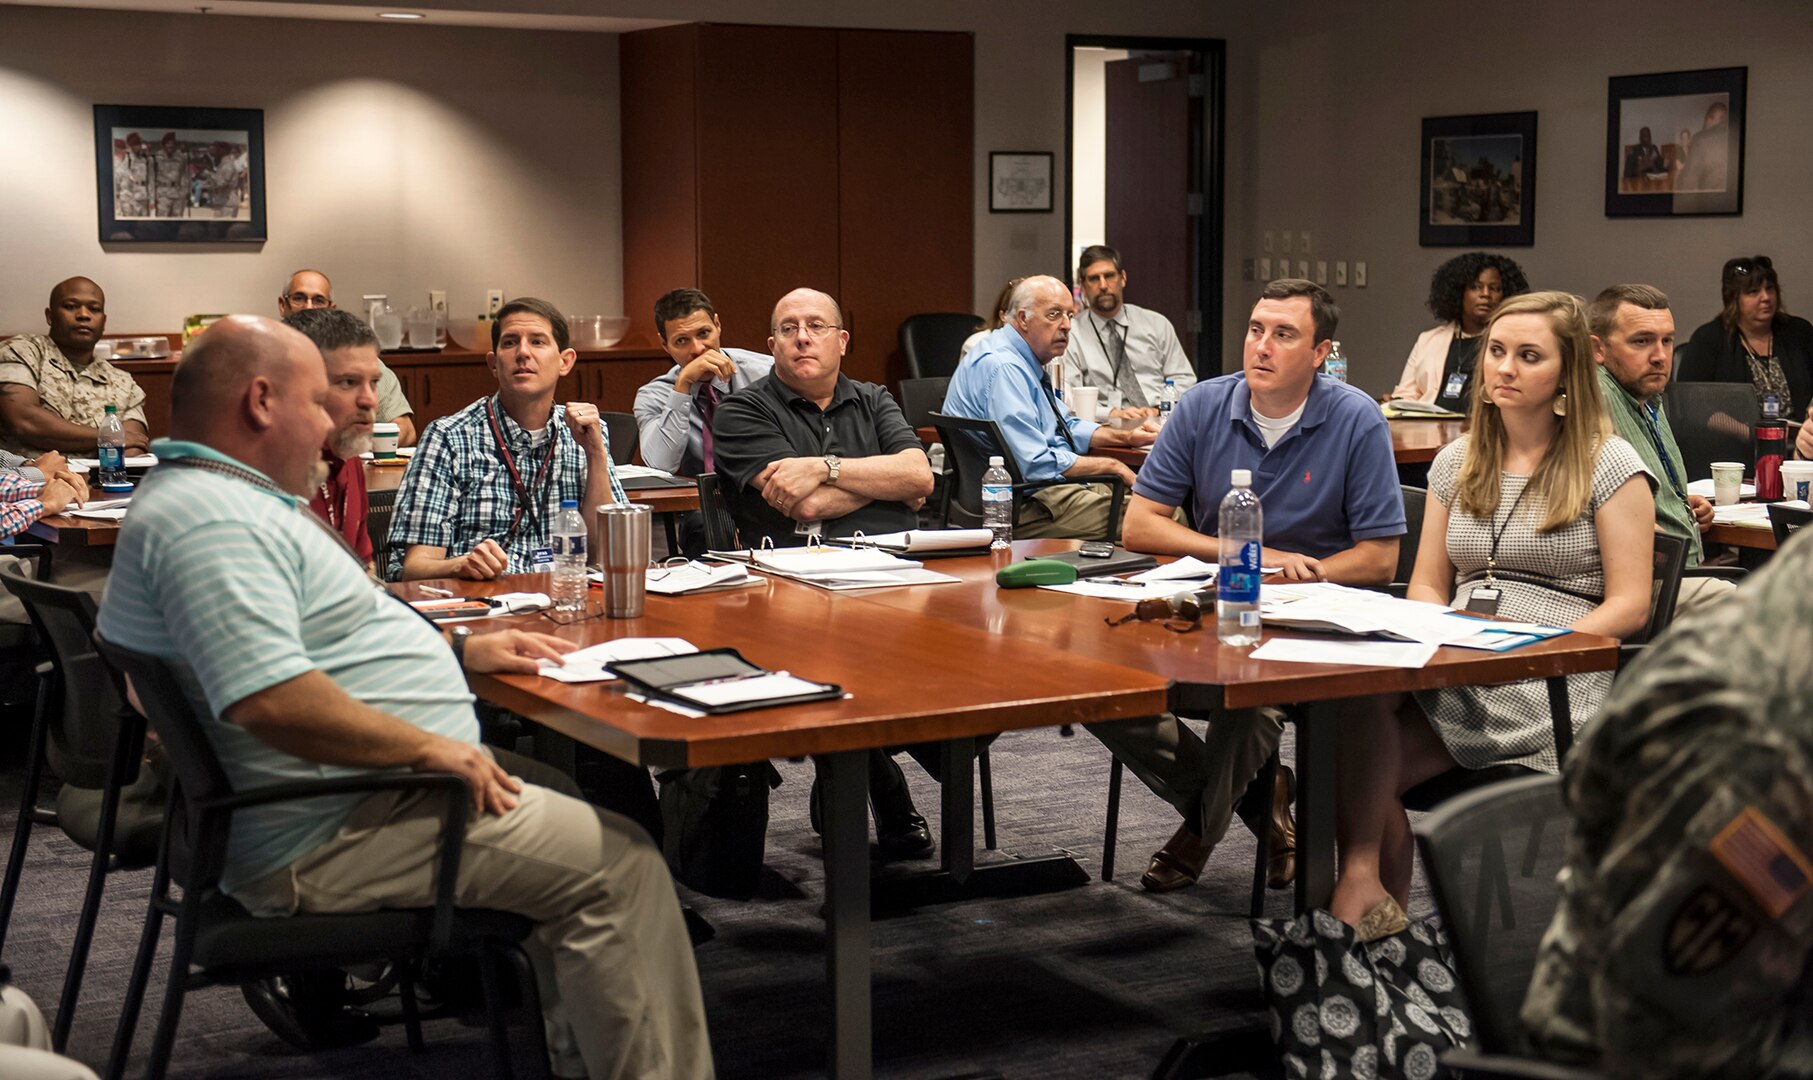 Land and Maritime hosted an Army Supply Planner Summit Aug. 11-13 at Defense Supply Center Columbus. During the three day event breakout sessions were held between DLA and LCMC personnel to enable them to have frank and open discussions about the way ahead with ASP.